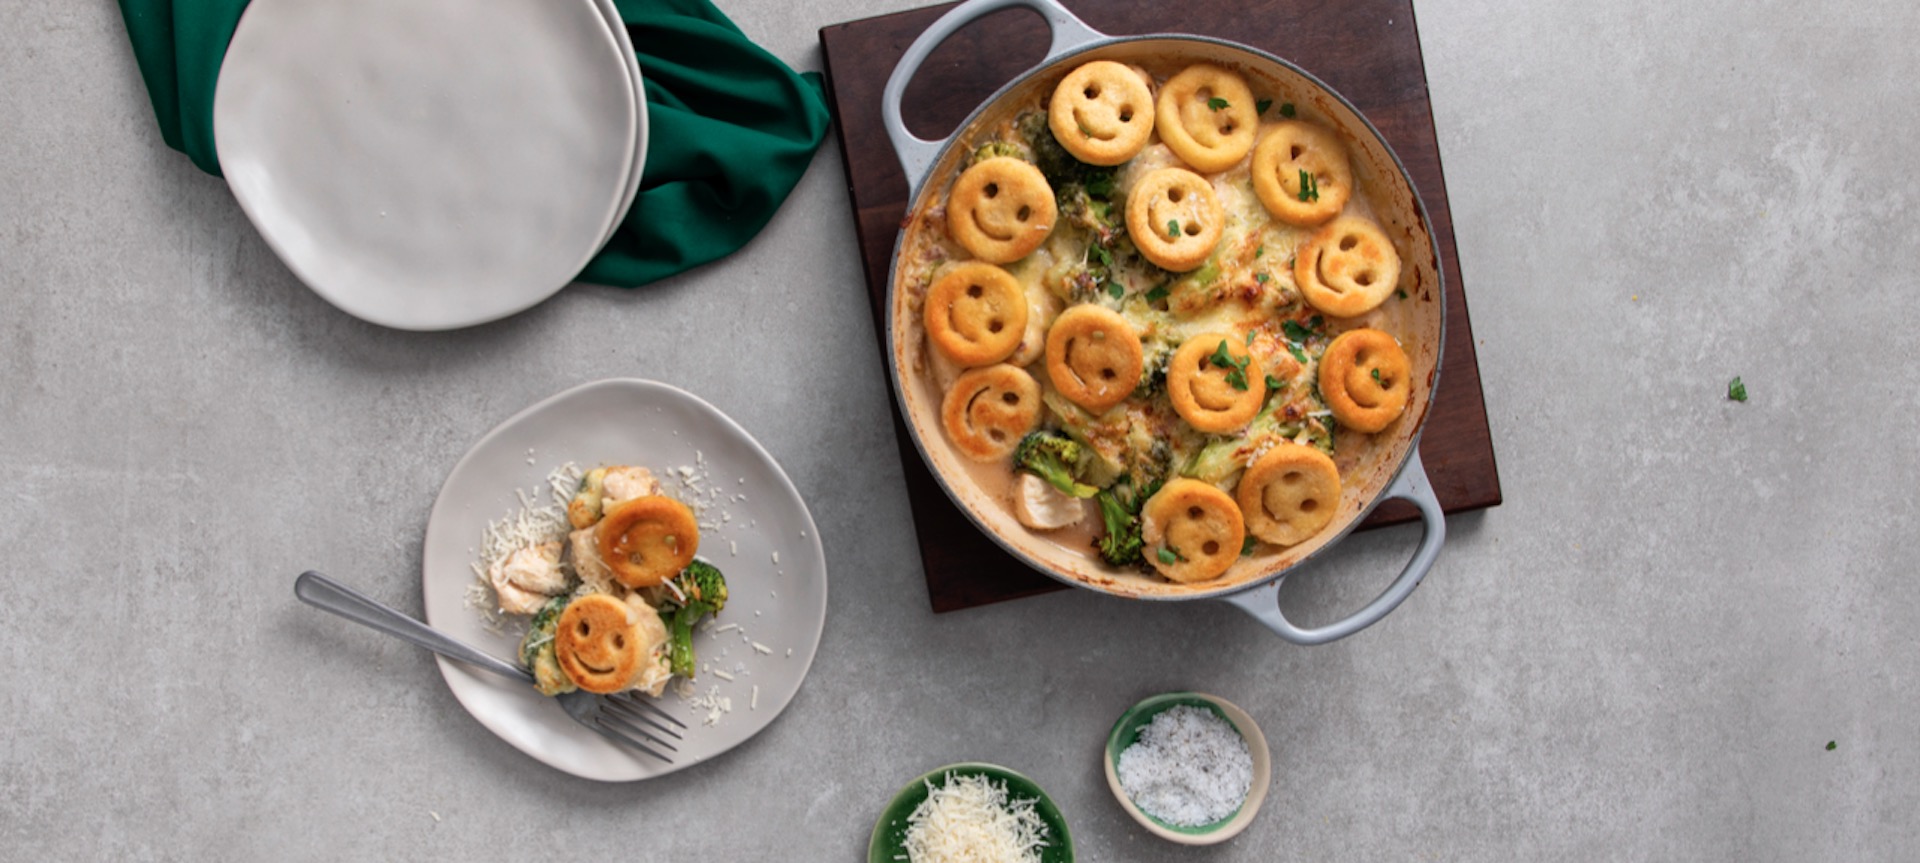 Chicken & Broccoli Bake With Smiles